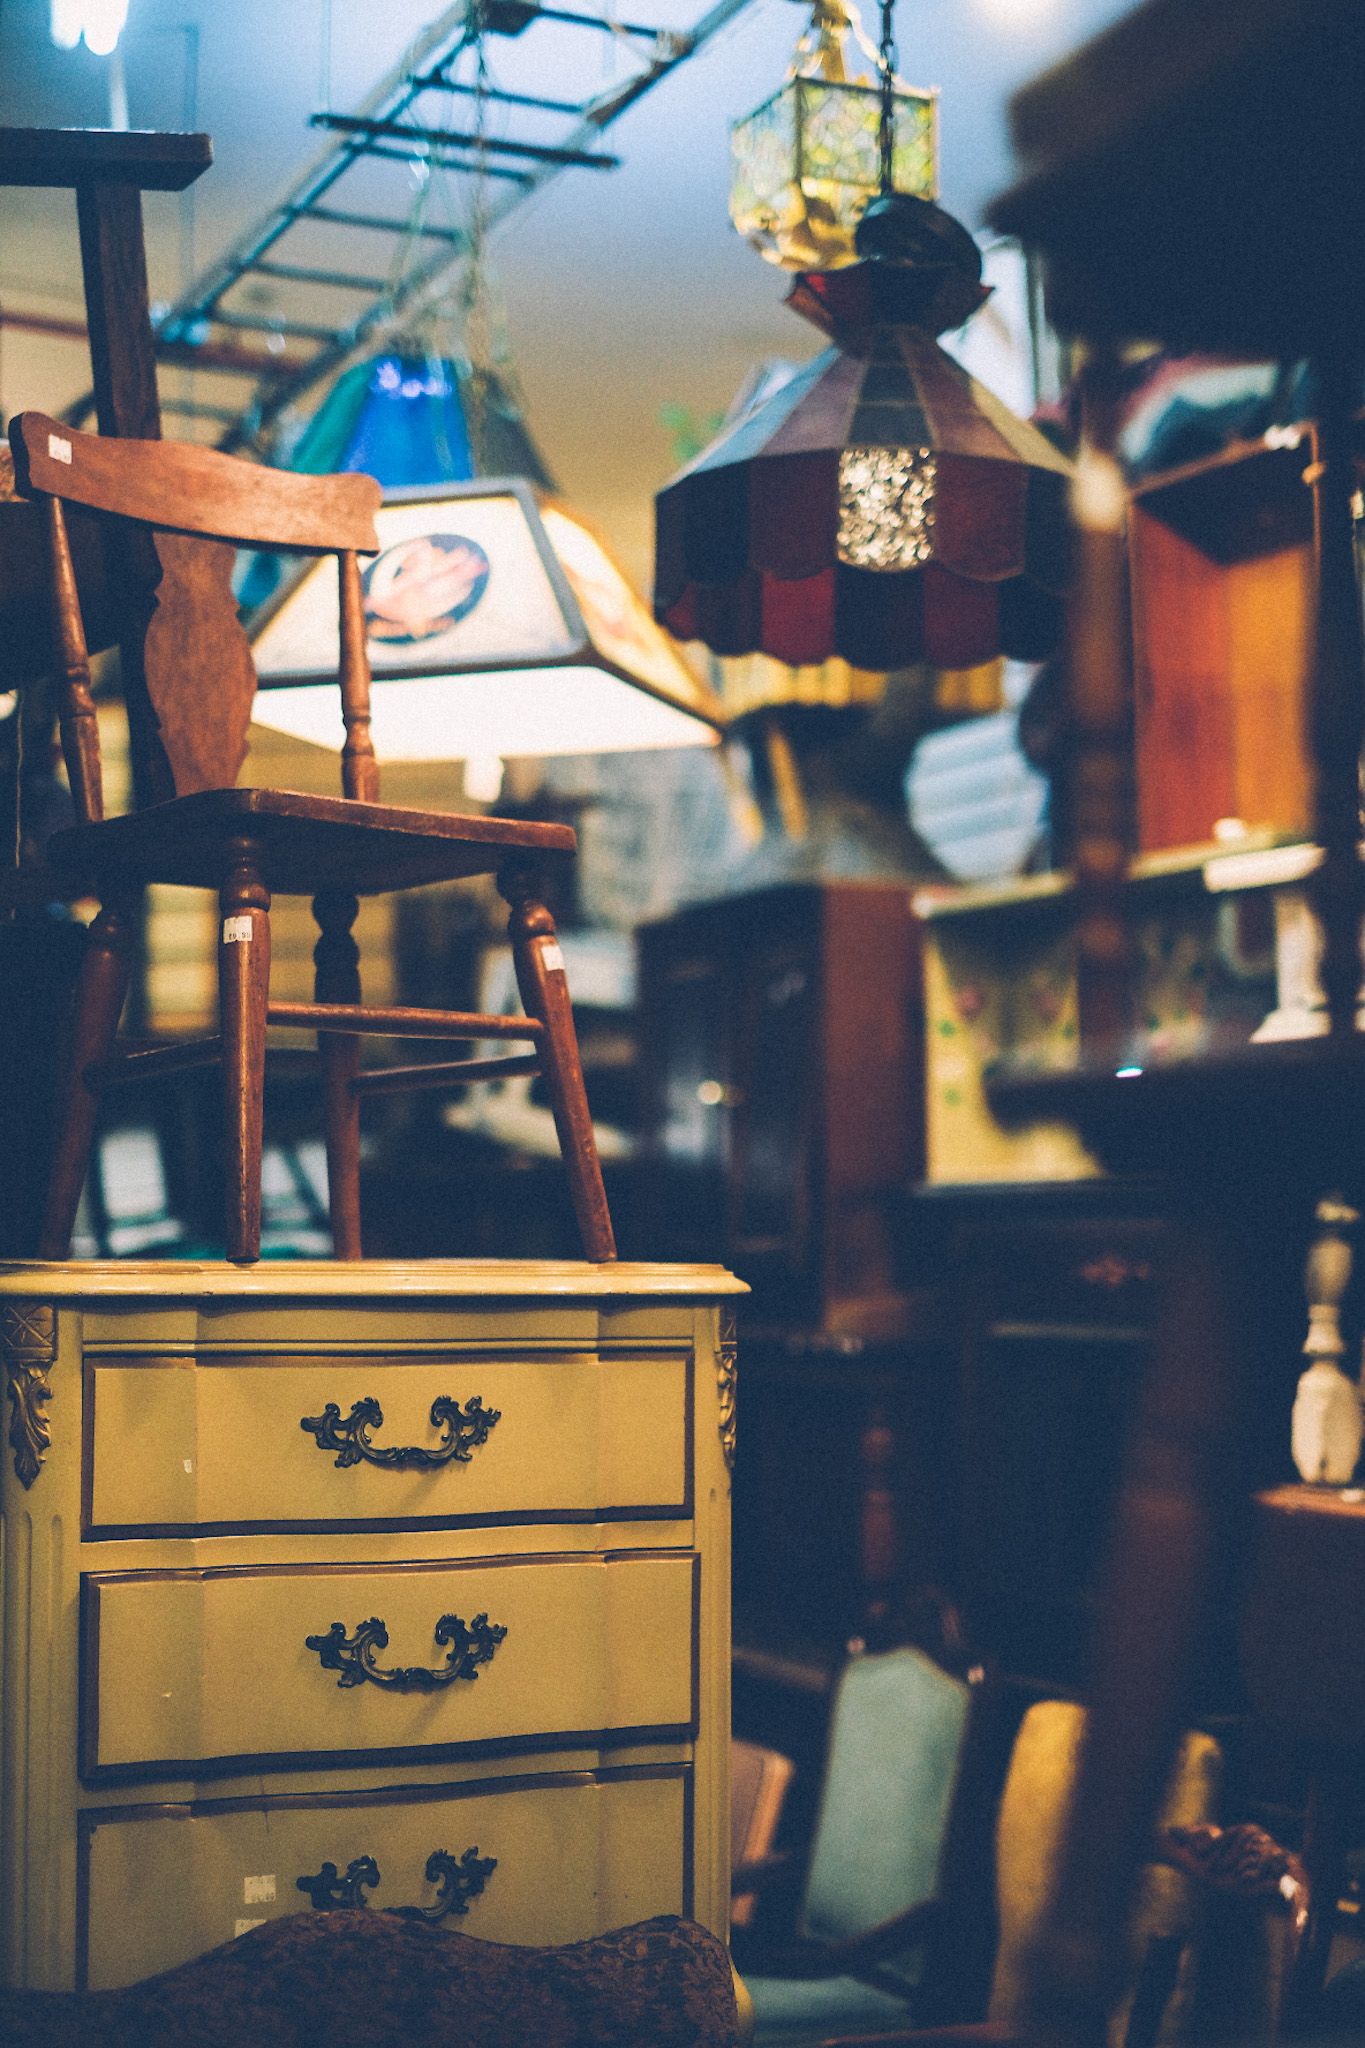 A wooden chair sits on top of a yellow dresser in an antique store. Lamps hang from the ceiling among all other clutter.